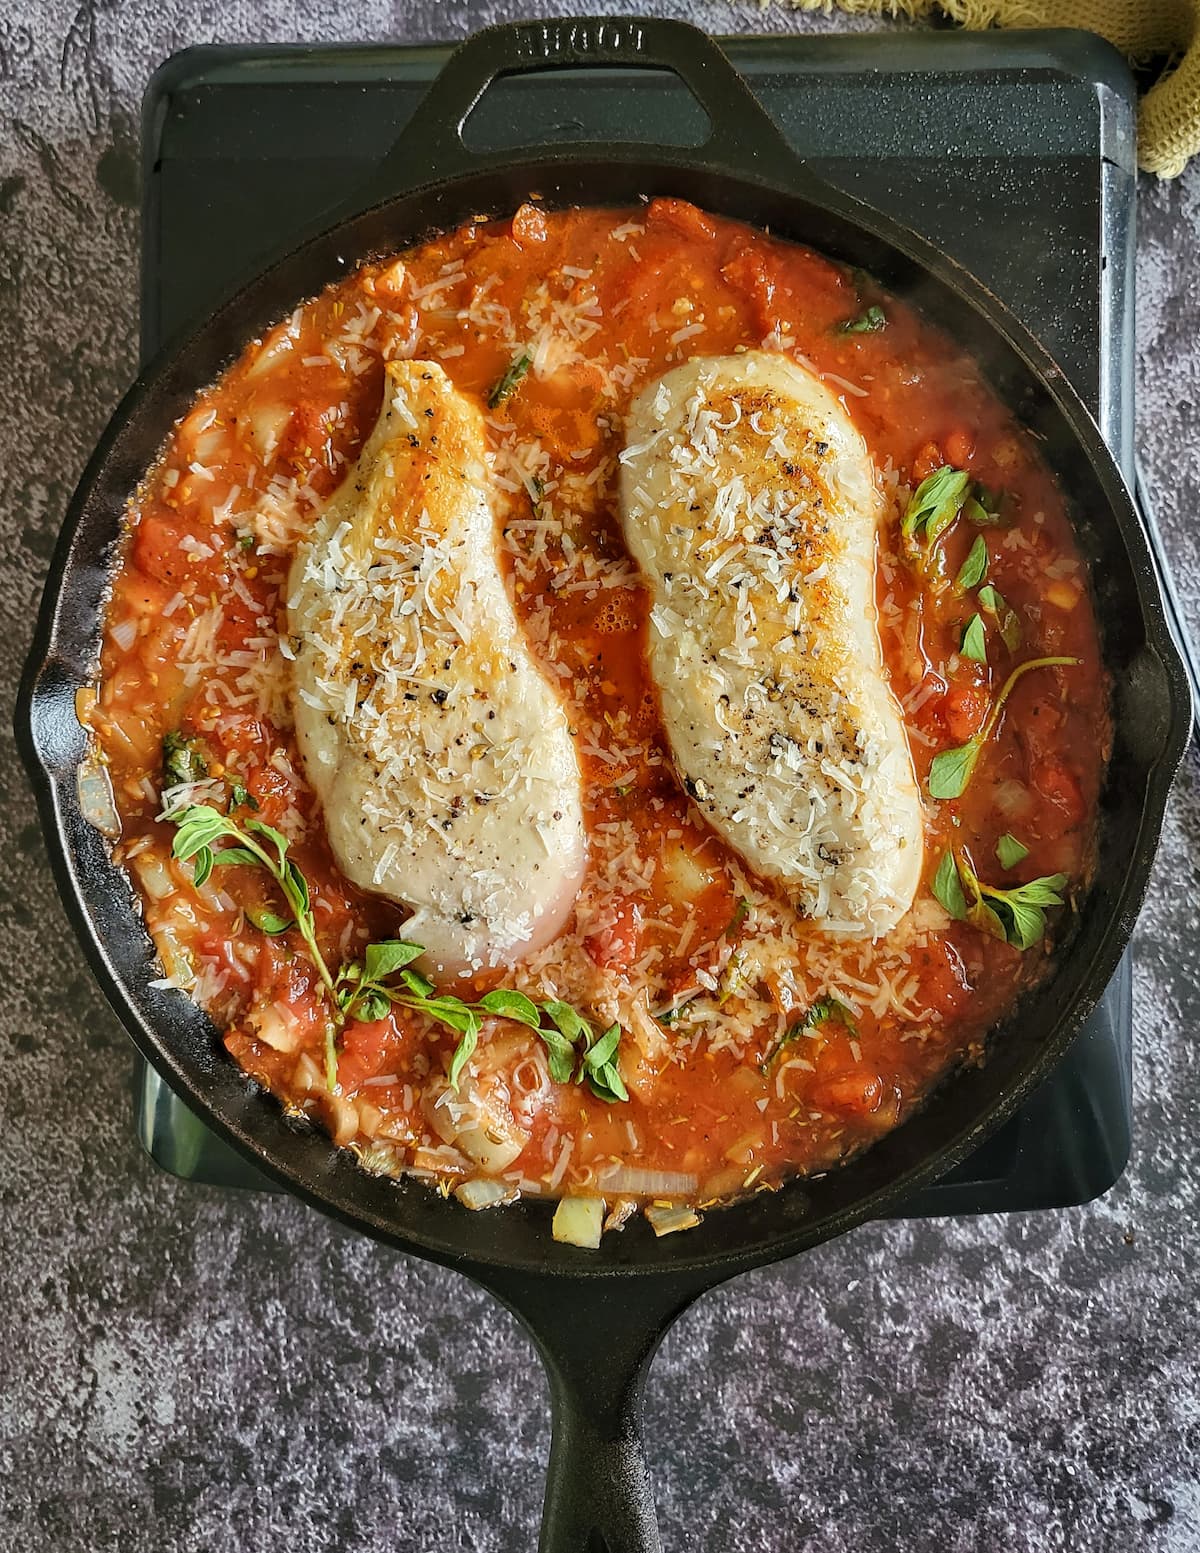 two chicken breasts seasoned with salt, pepper and grated parmesan cheese in a cast iron skillet with tomato sauce and sprigs of fresh oregano